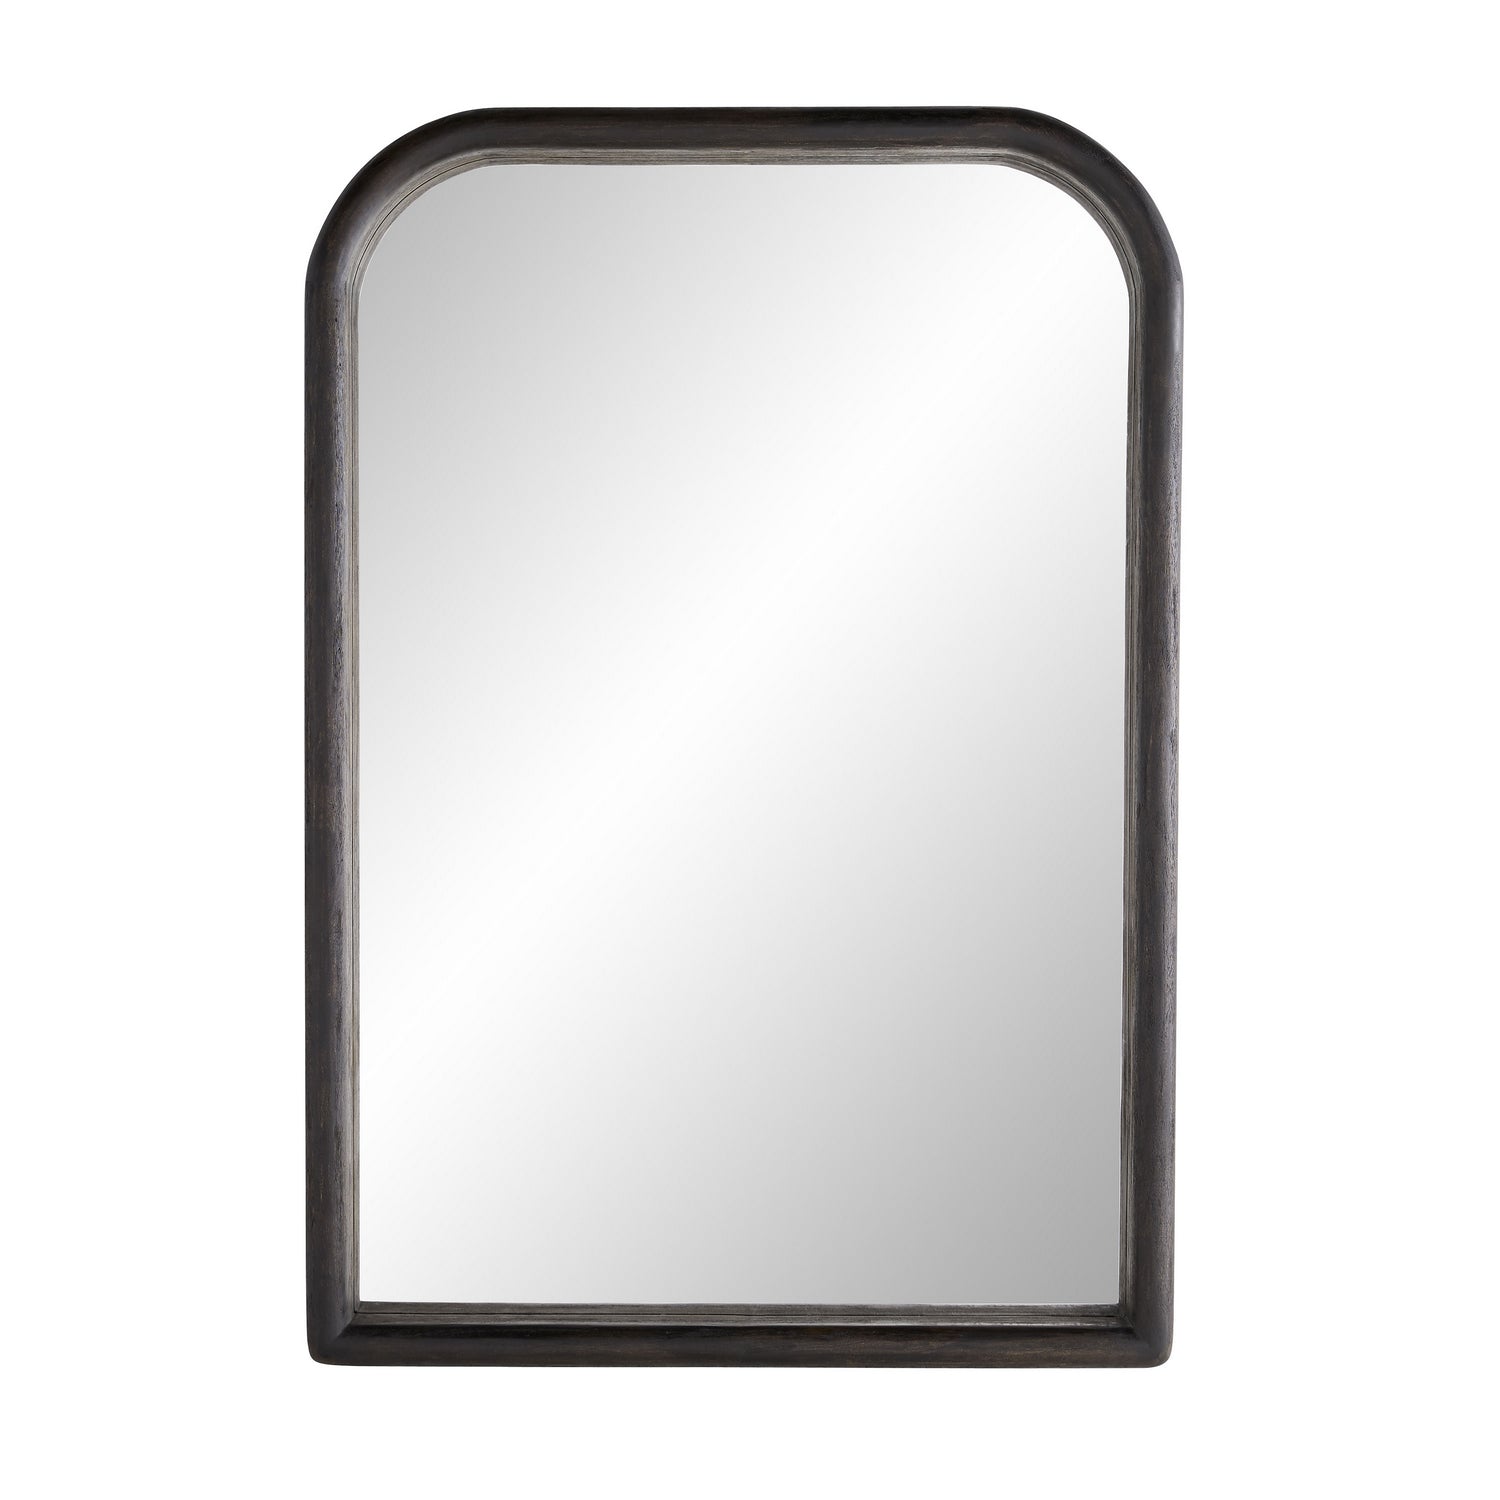 Mirror from the Betheny collection in Dark Walnut finish